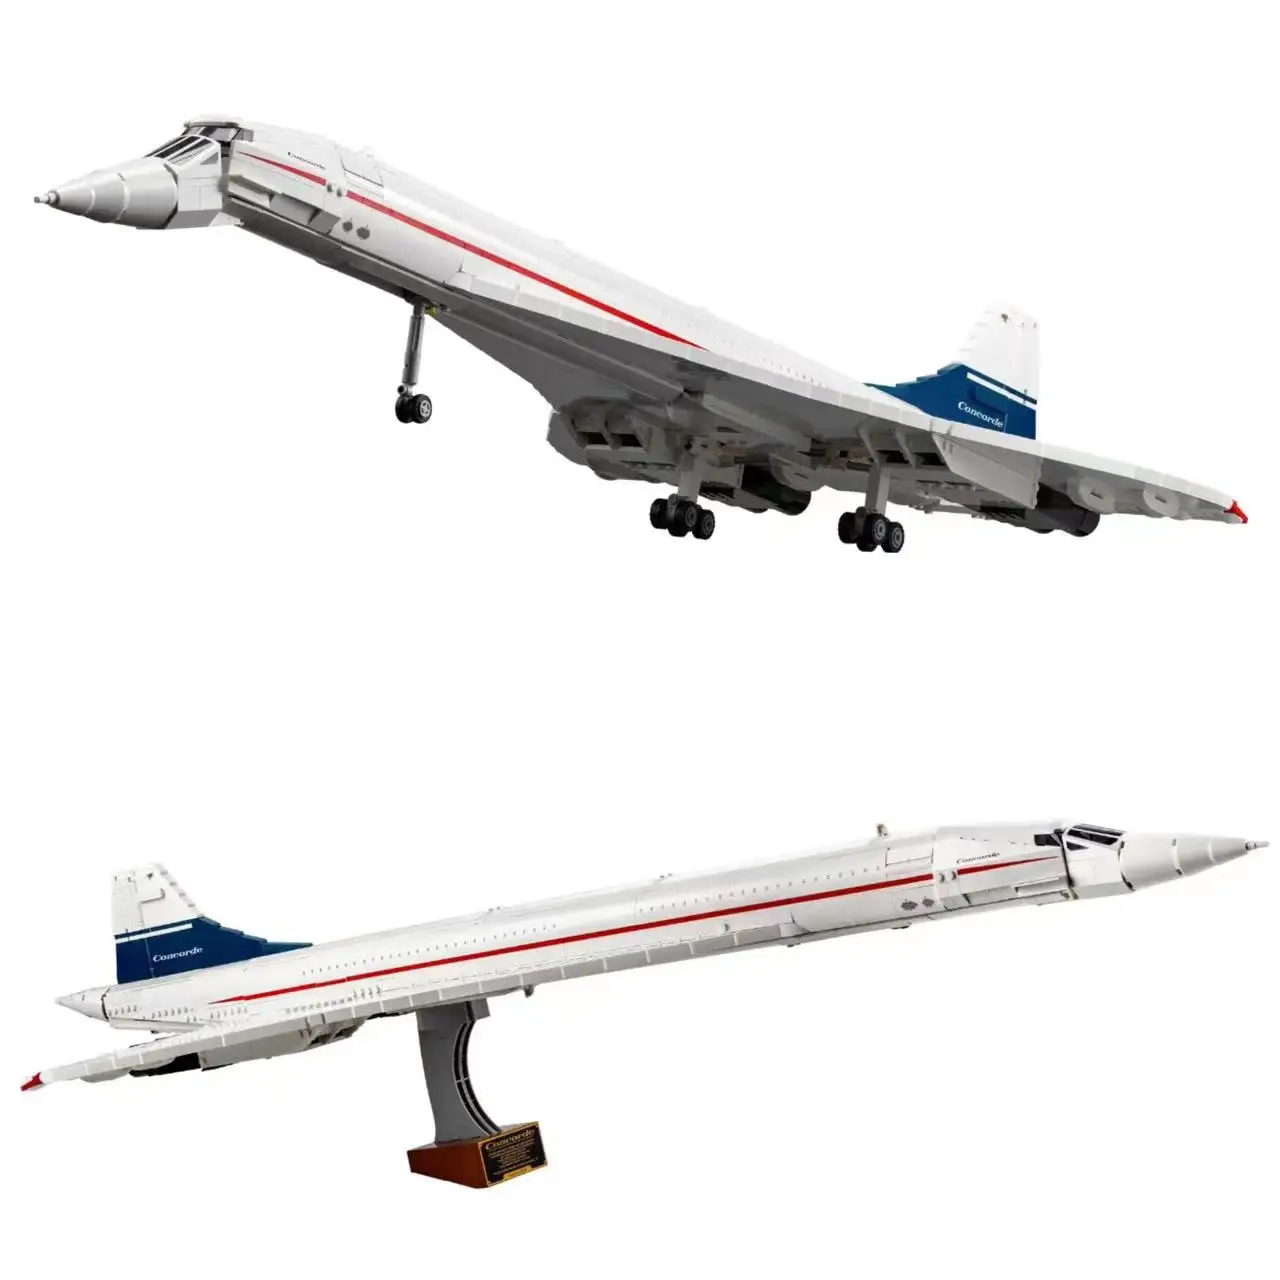 

2023 NEW 10318 Concorde City Airport Airbus Aircraft Airplane Model Building Blocks Helicopter Space Shuttle Bricks Toys for Kid